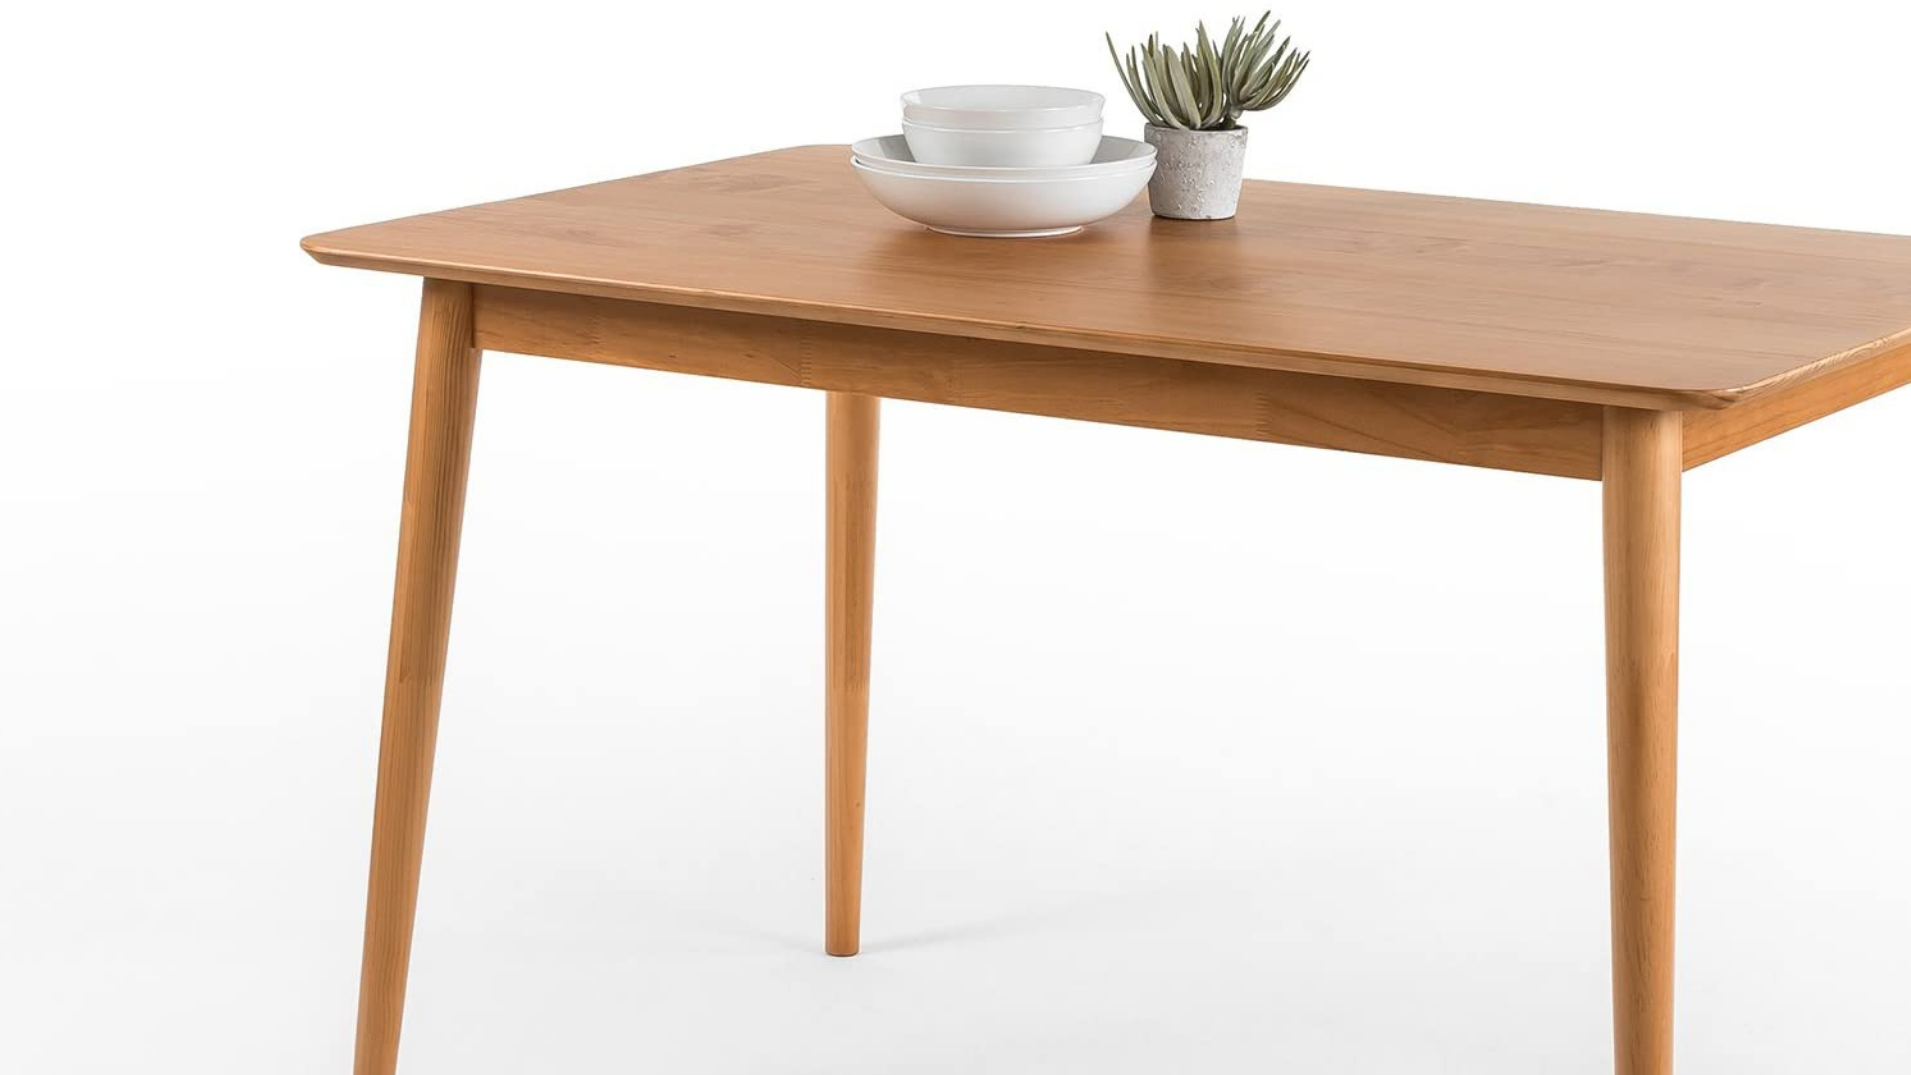 This solid pine wood table is a sturdy option.